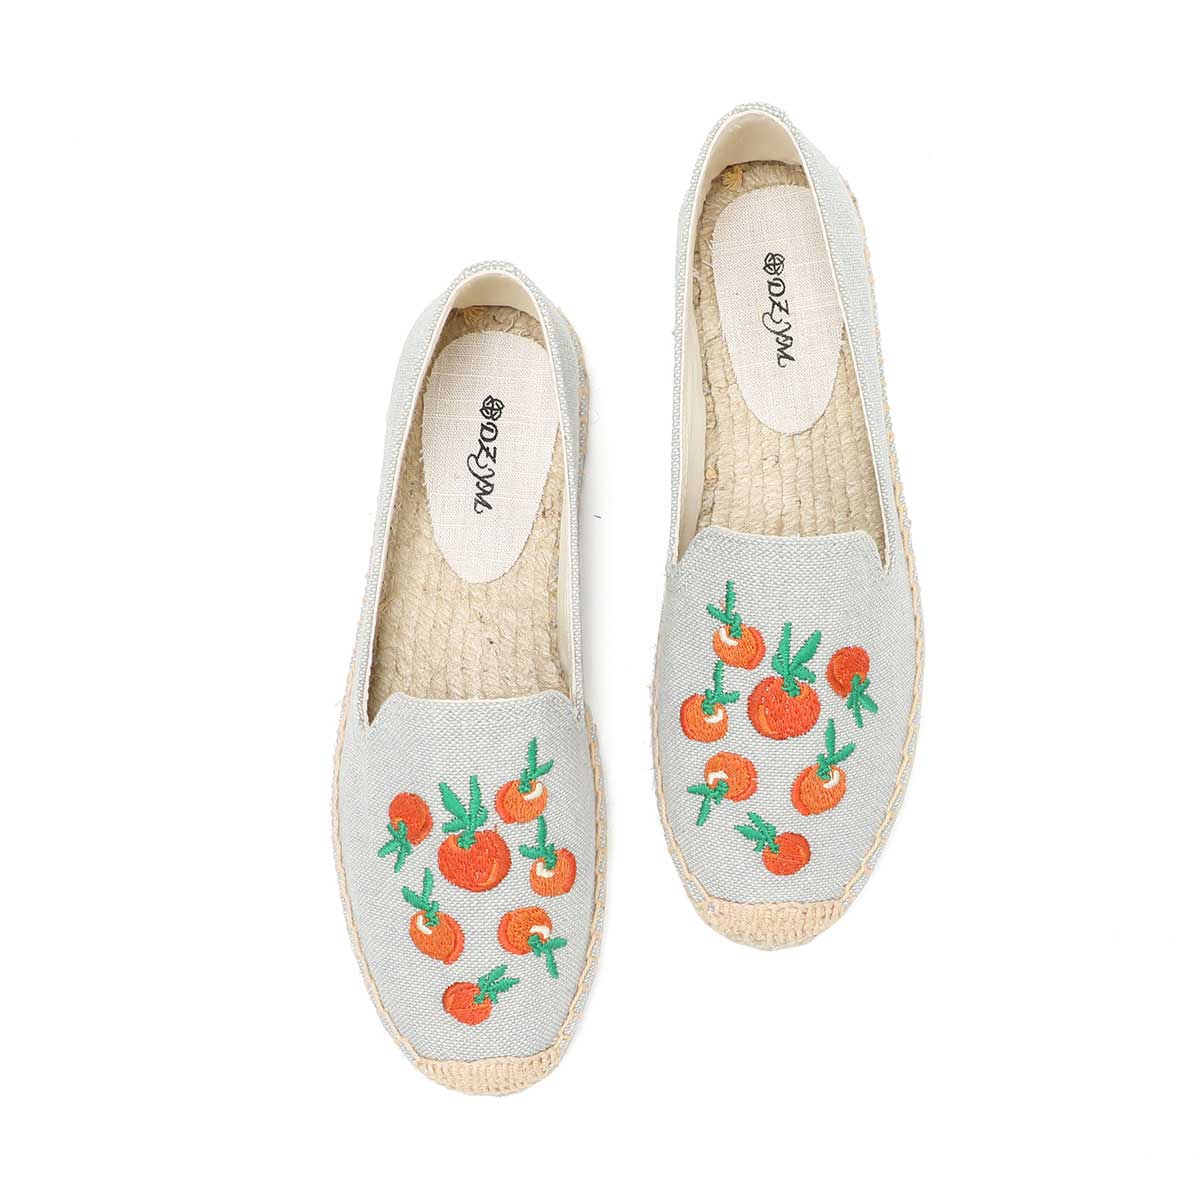 Ladies Straw Casual Cloth Shoes Slip-On New Summer Linen Flat Casual Shoes Comfortable Versatile Loafers Hot Sale